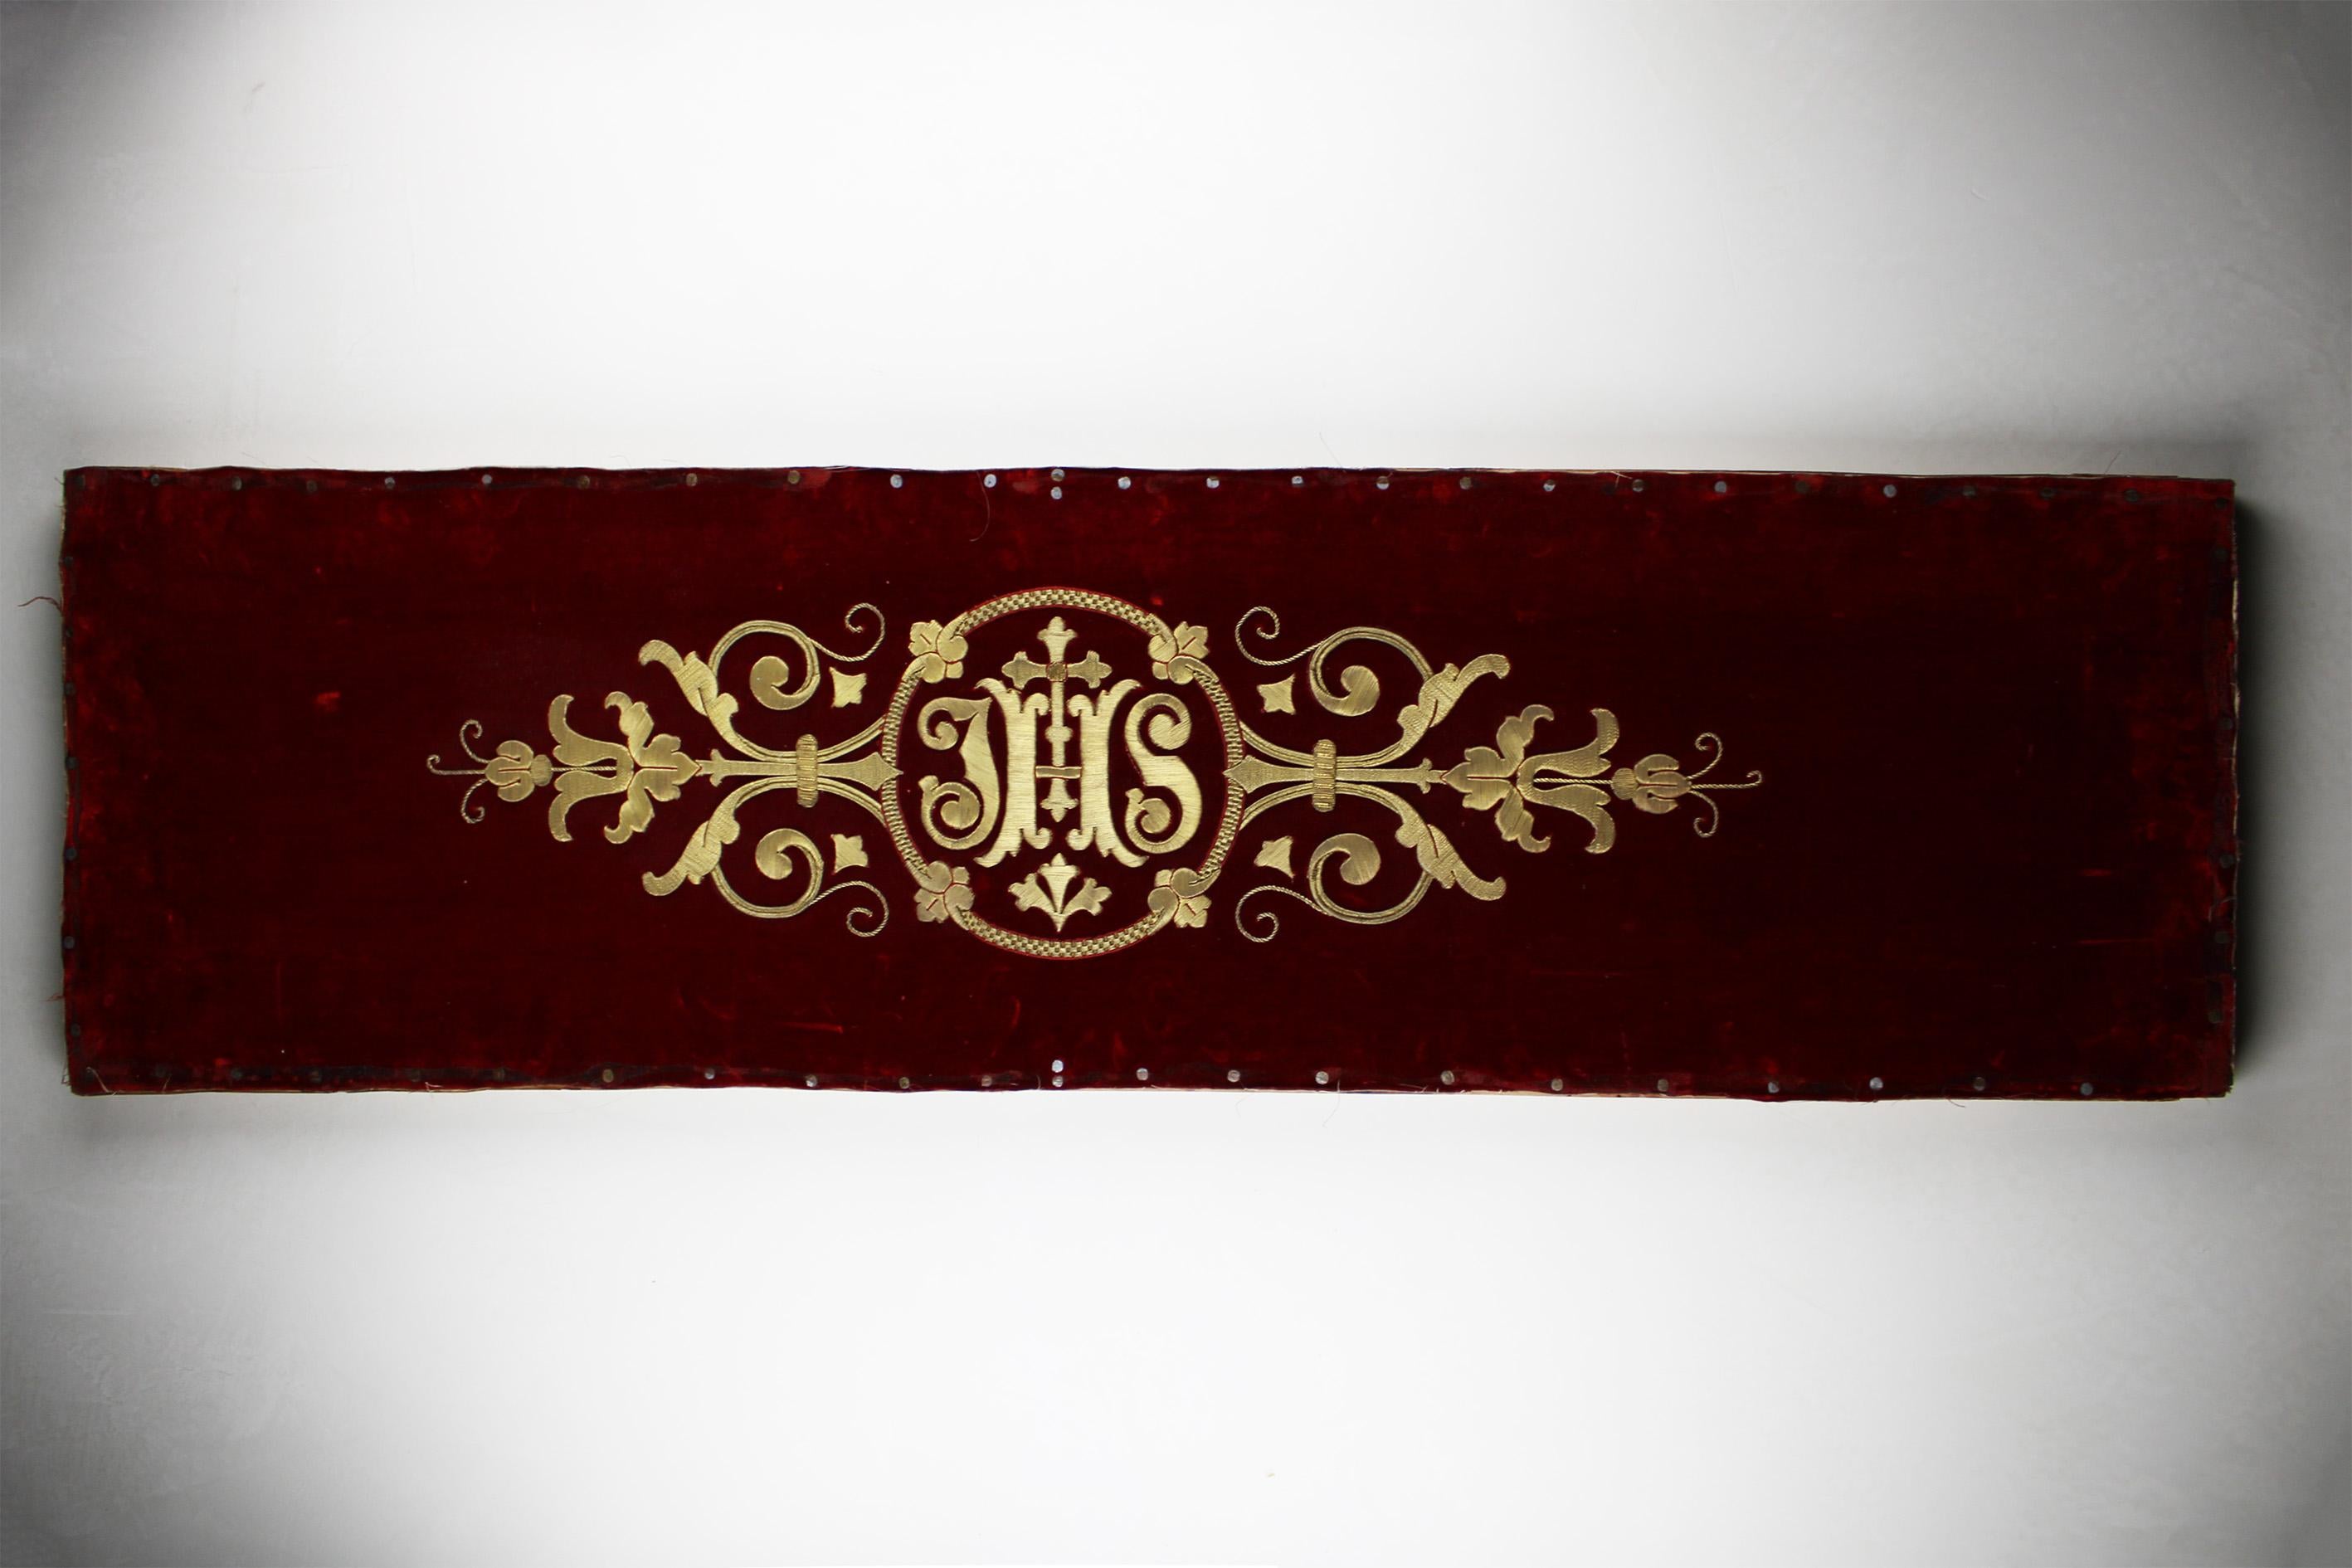 Transport yourself to the refined beauty of the 19th century with our magnificent raised goldwork embroidery. Originating from Belgium, this piece is a testament to the unparalleled craftsmanship of the era. 

Designed for liturgical use, this